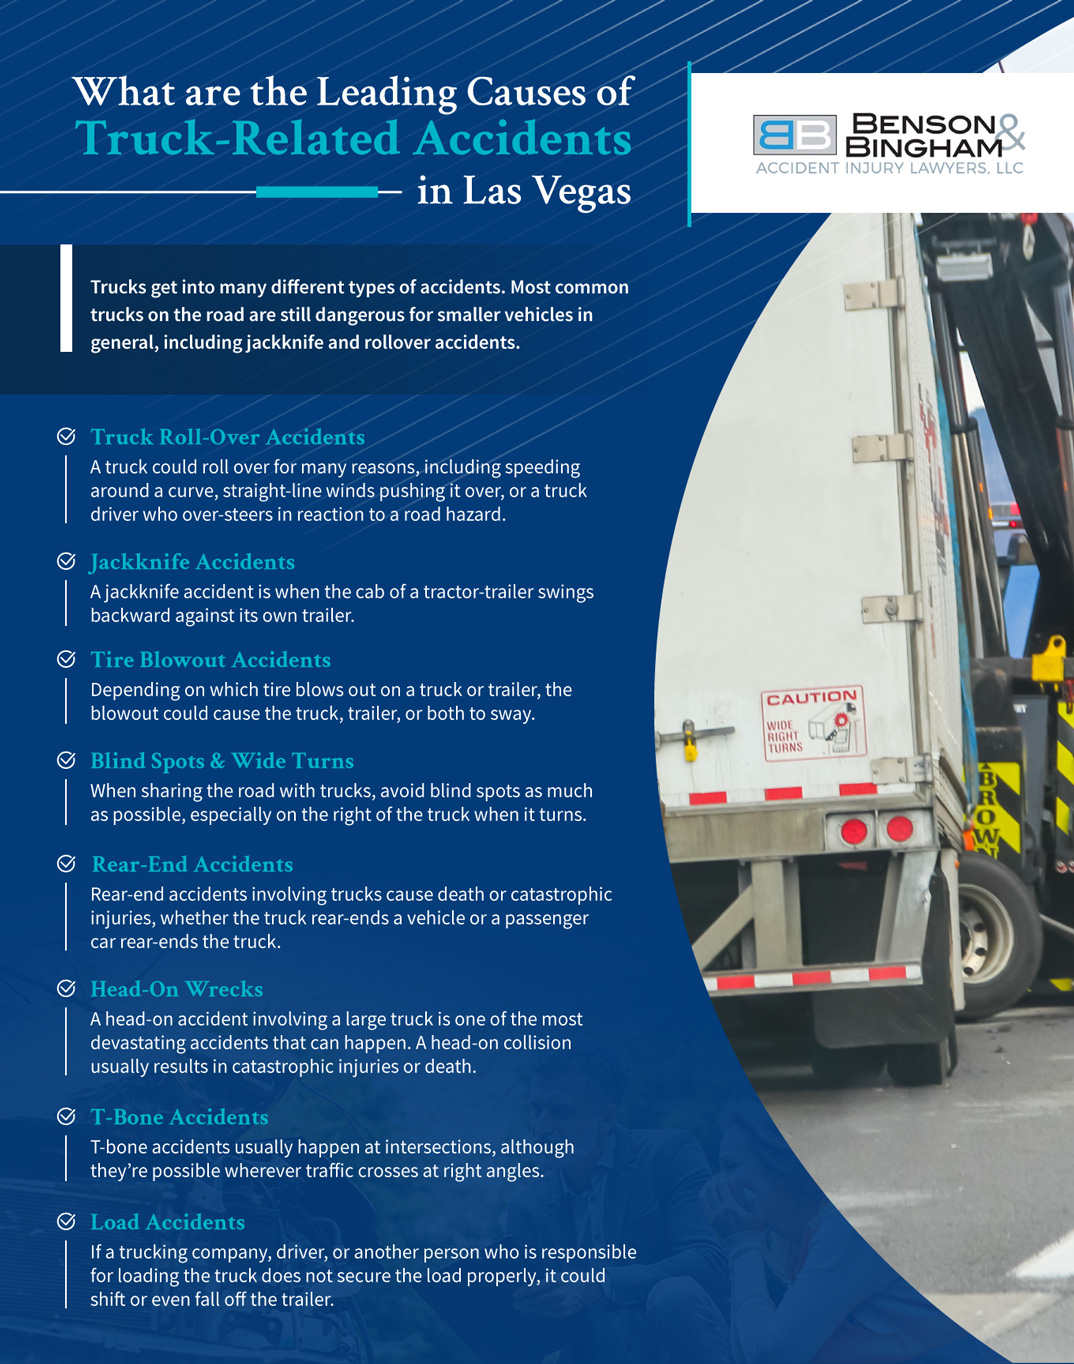 Infographic that shows the leading causes of truck-related accidents in Las Vegas